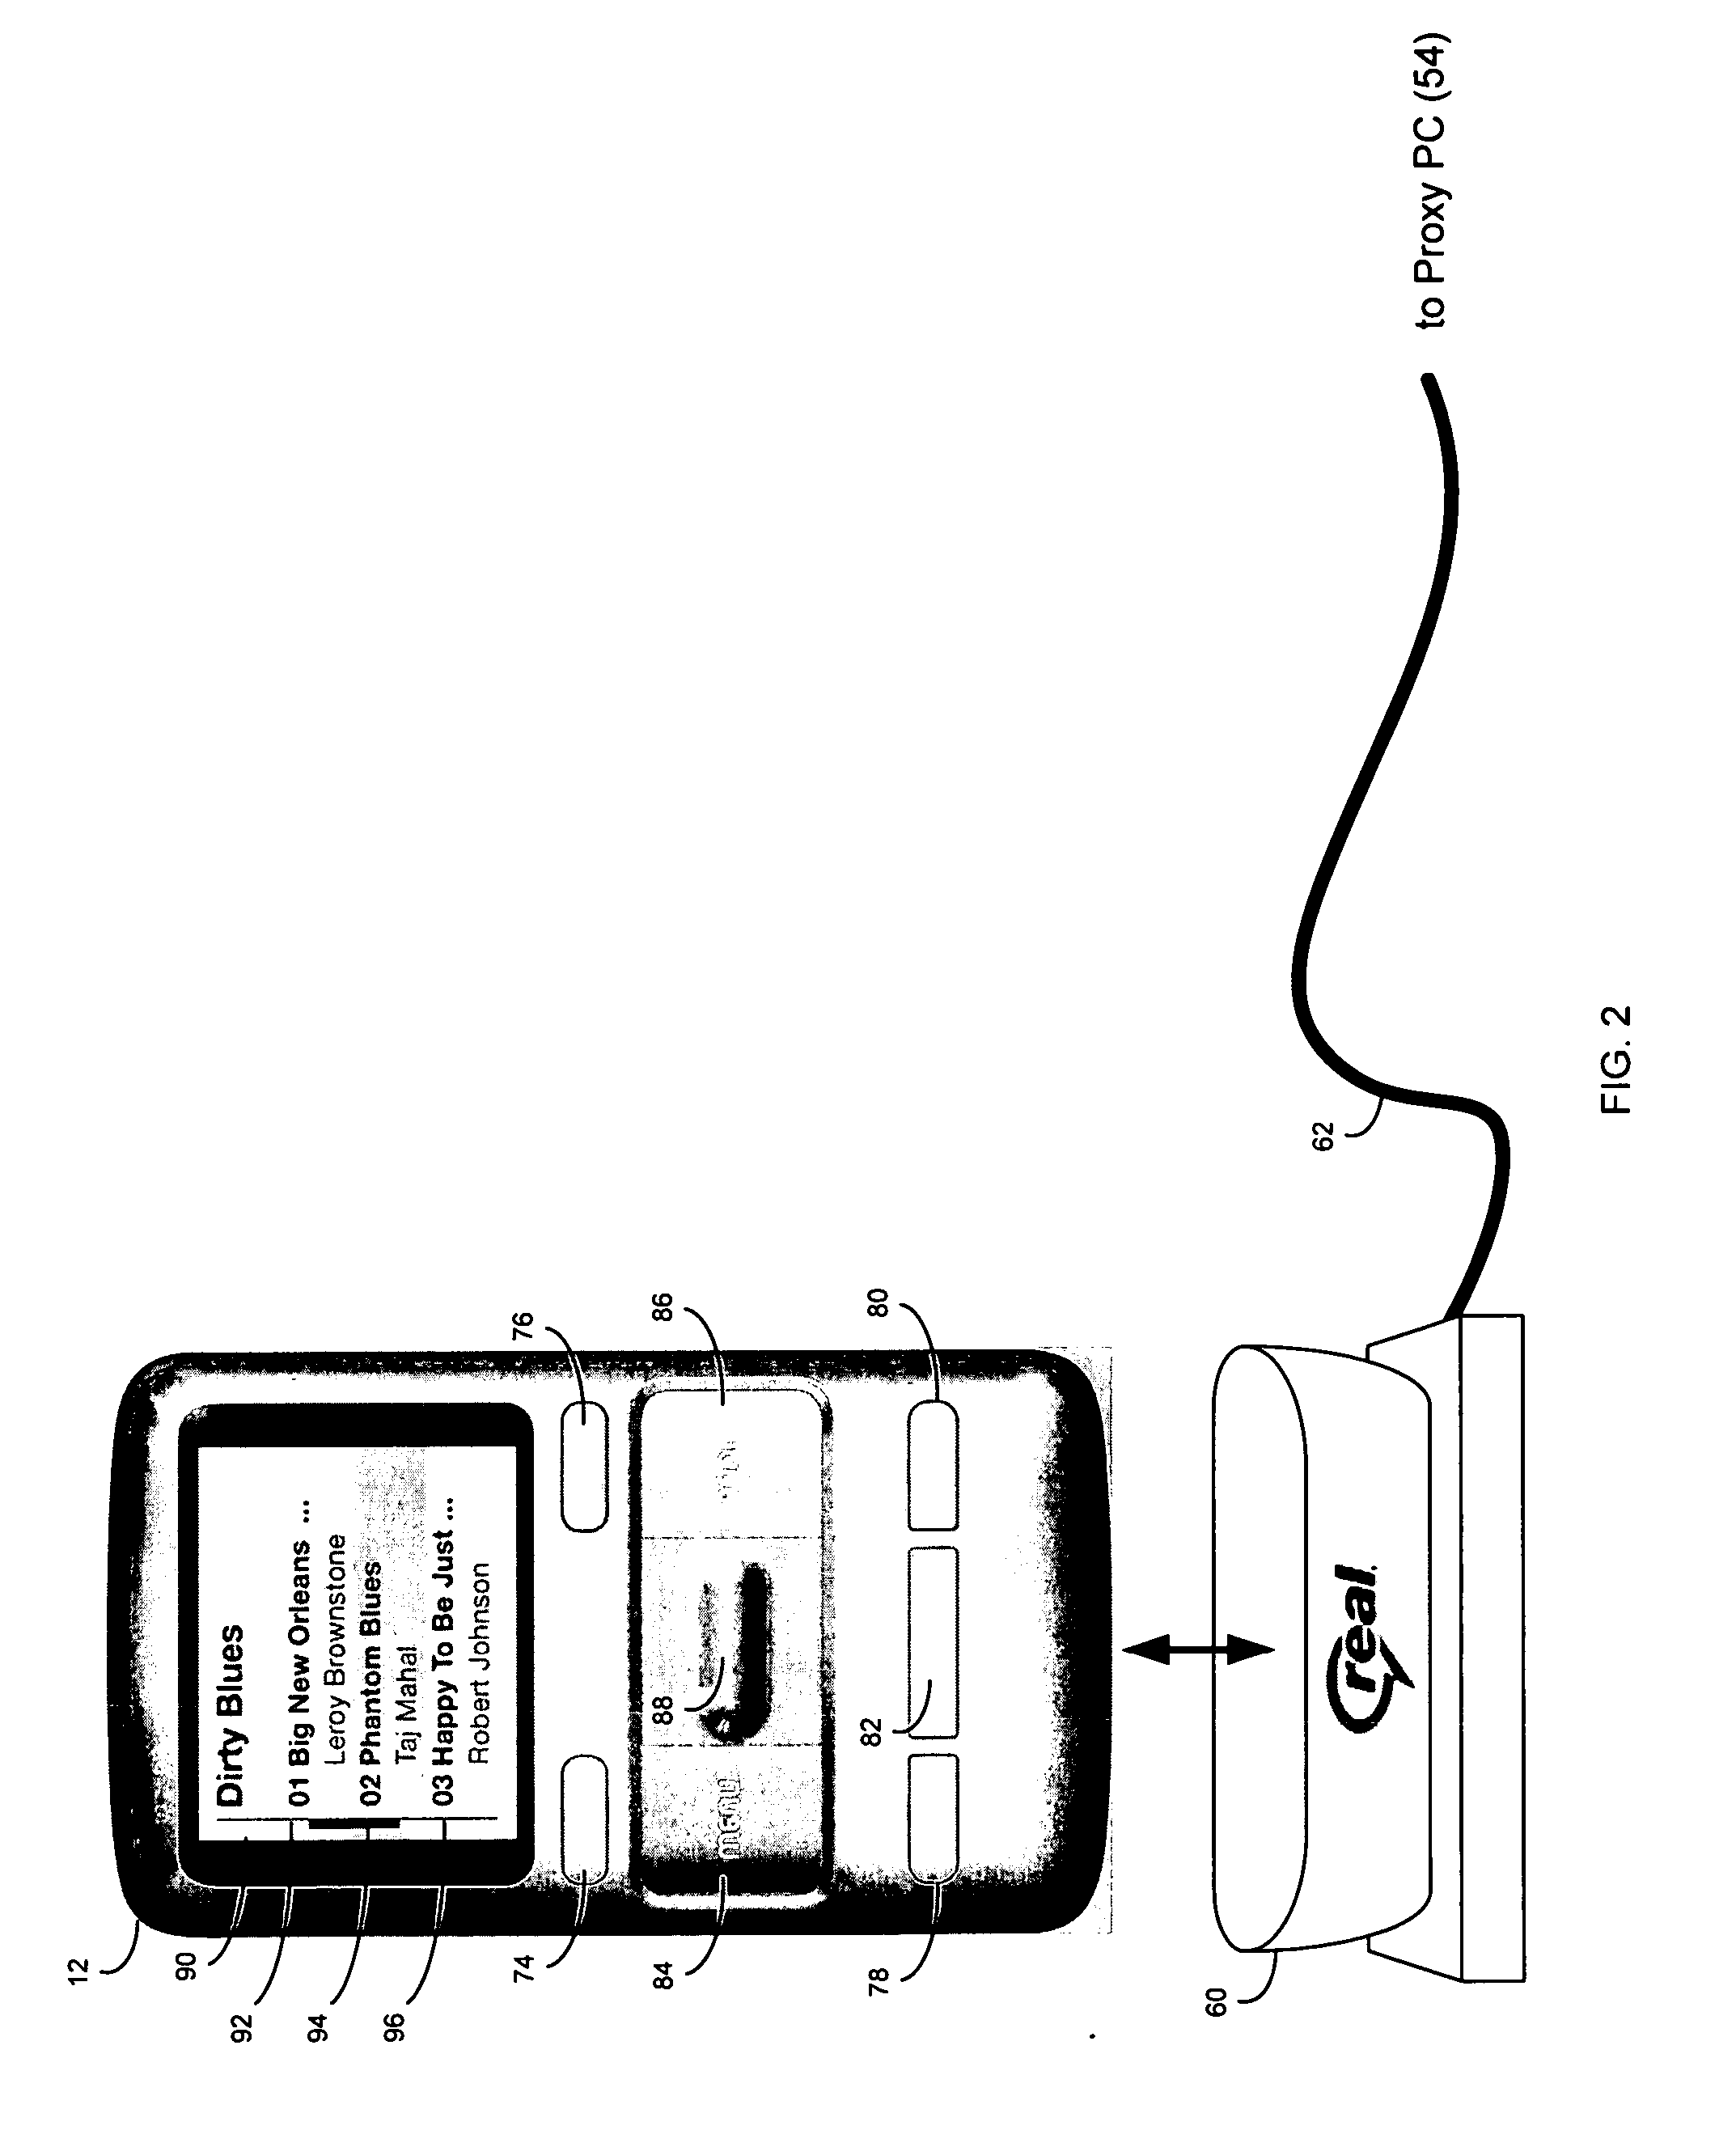 System and method for chronologically presenting data